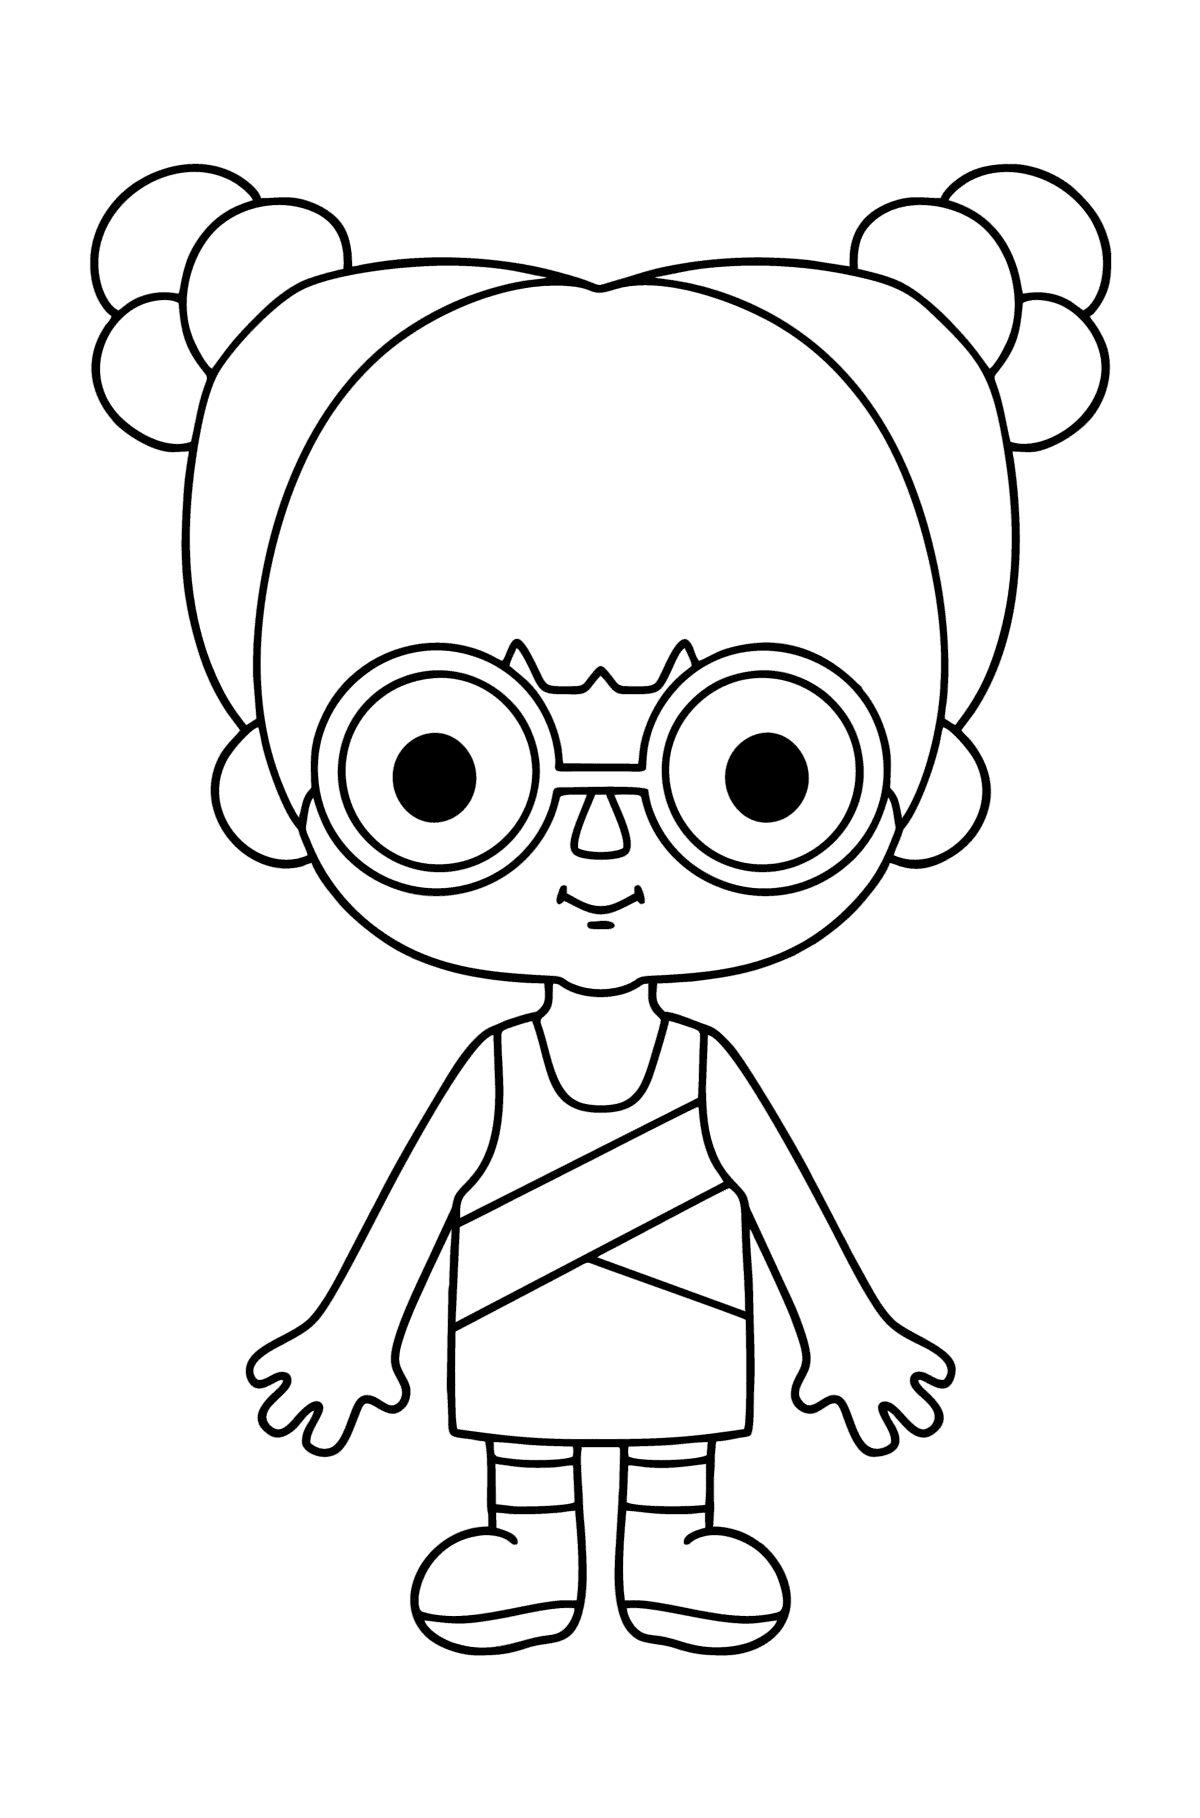 Coloring page Girl tocaboca 04 - Coloring Pages for Kids